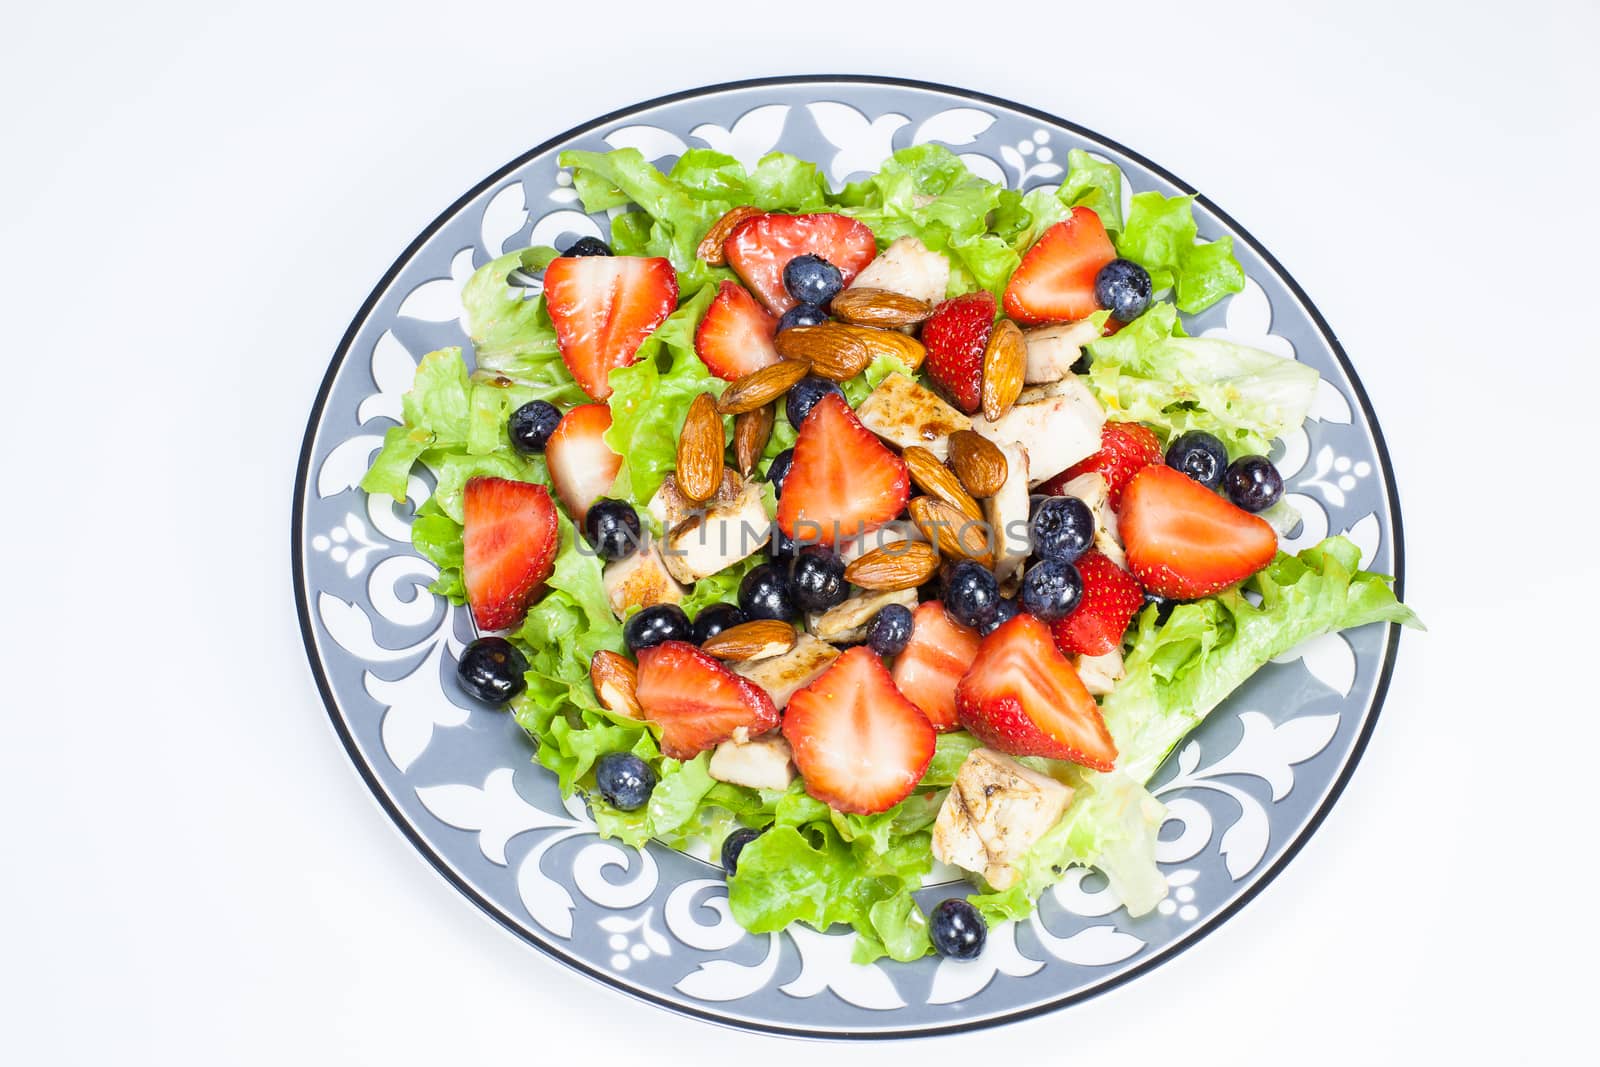 Berry salad with chicken, almond and lettuce. Summer salad. Viewed from above